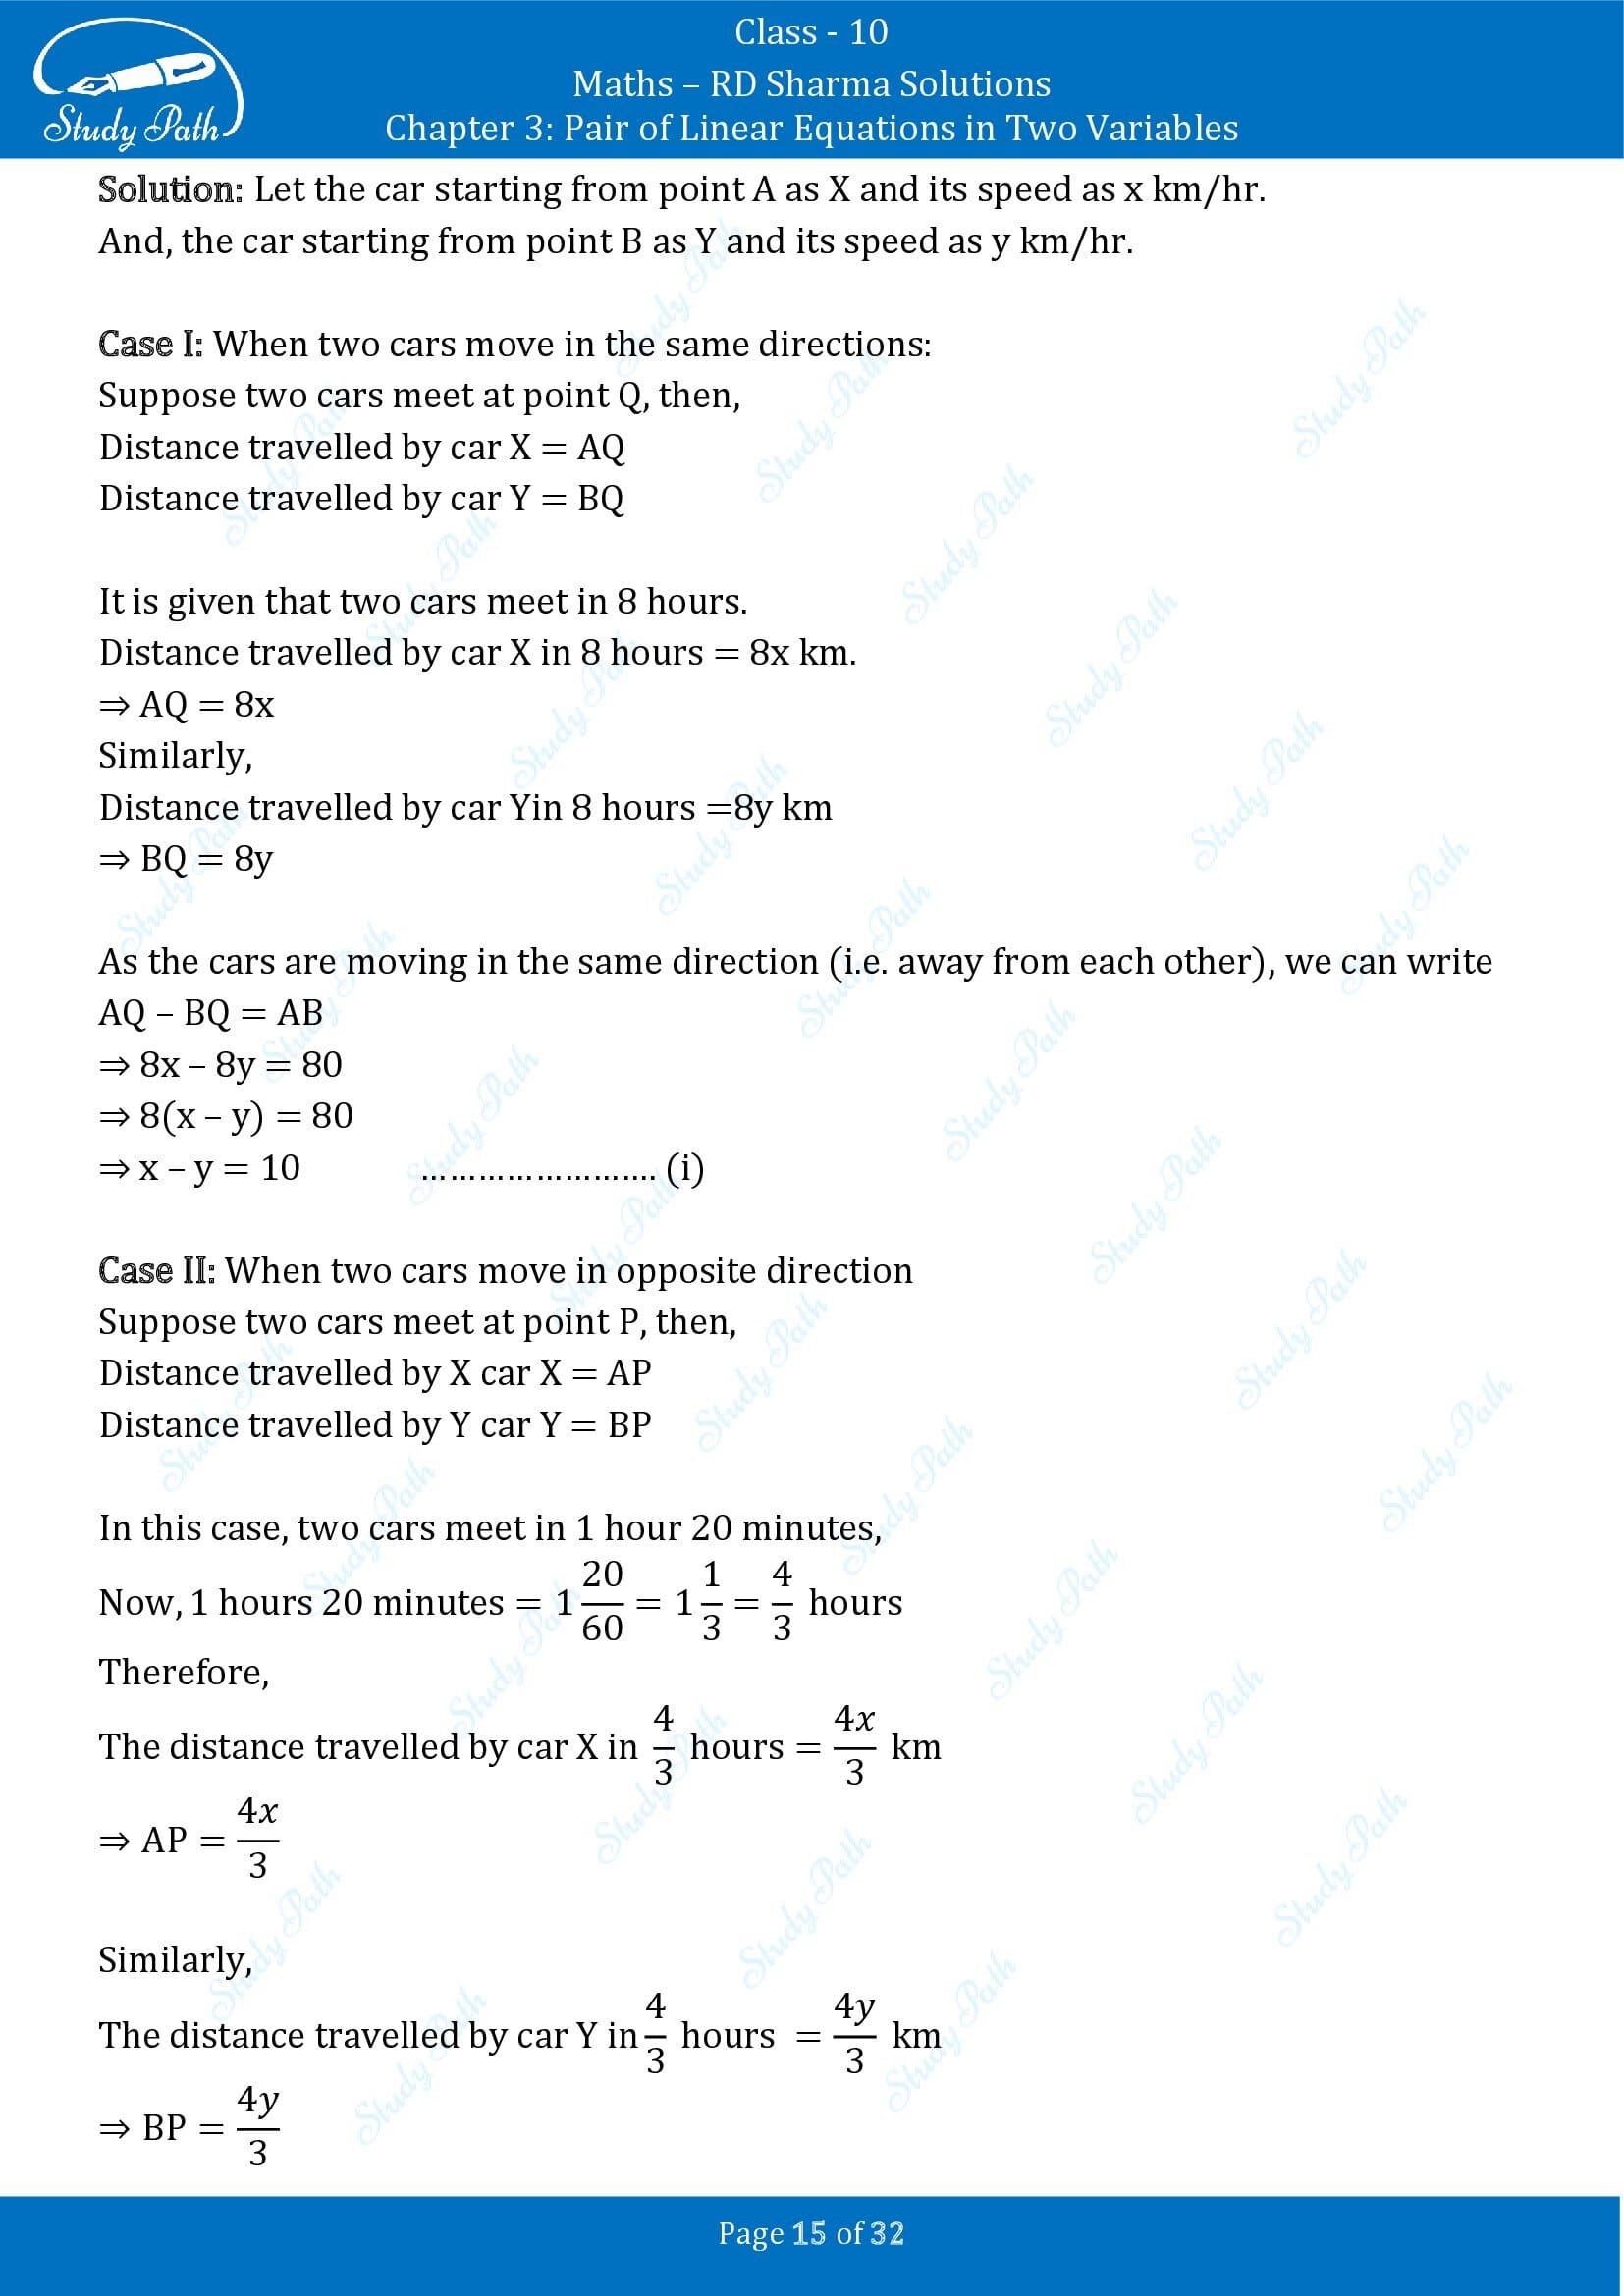 RD Sharma Solutions Class 10 Chapter 3 Pair of Linear Equations in Two Variables Exercise 3.10 00015